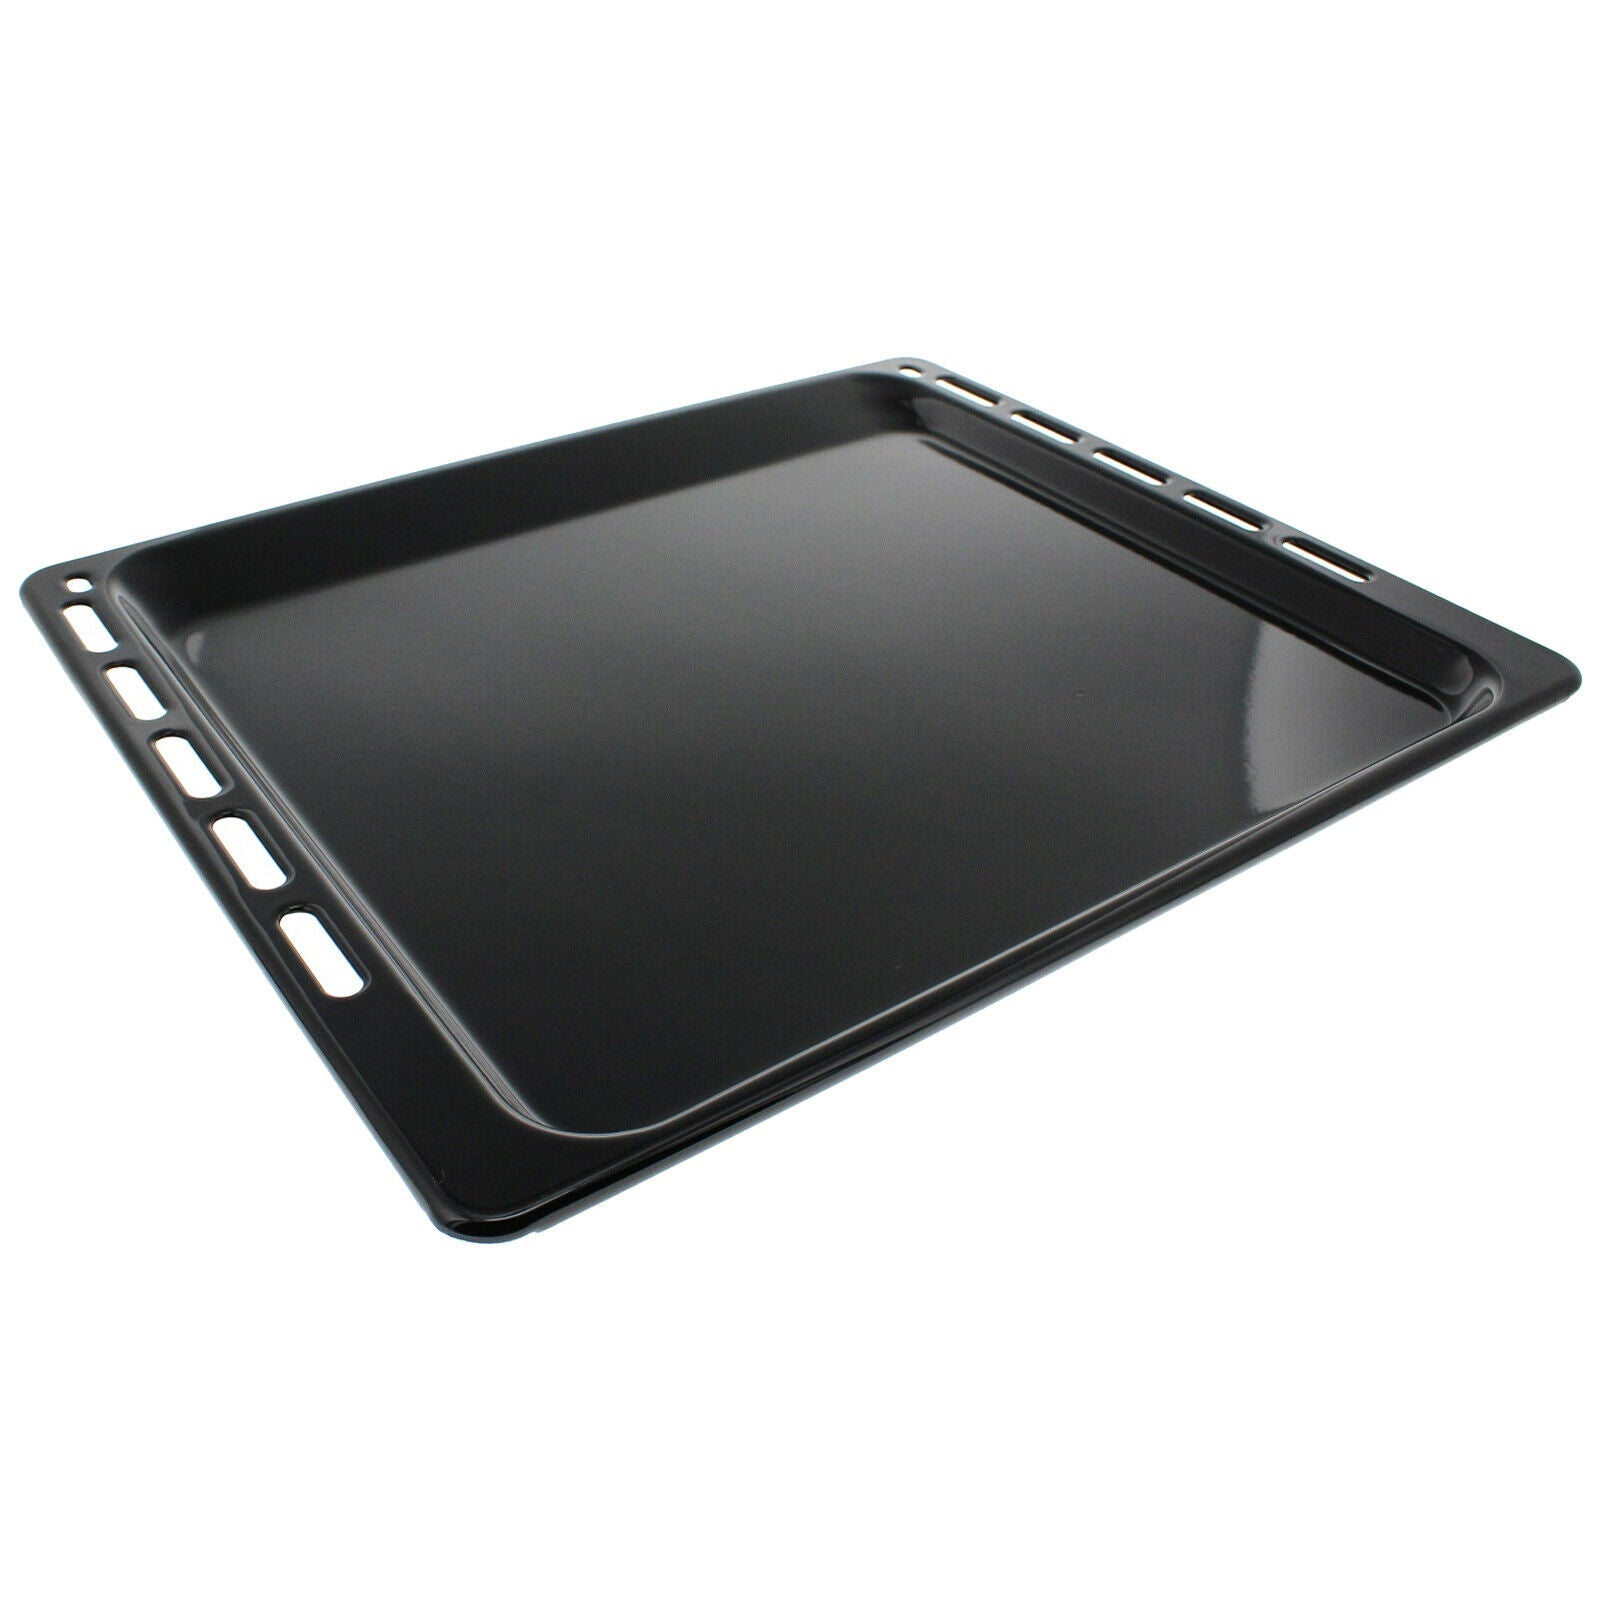 Enamelled Baking Tray Pan Base for IKEA Oven Cooker 445mm x 375mm